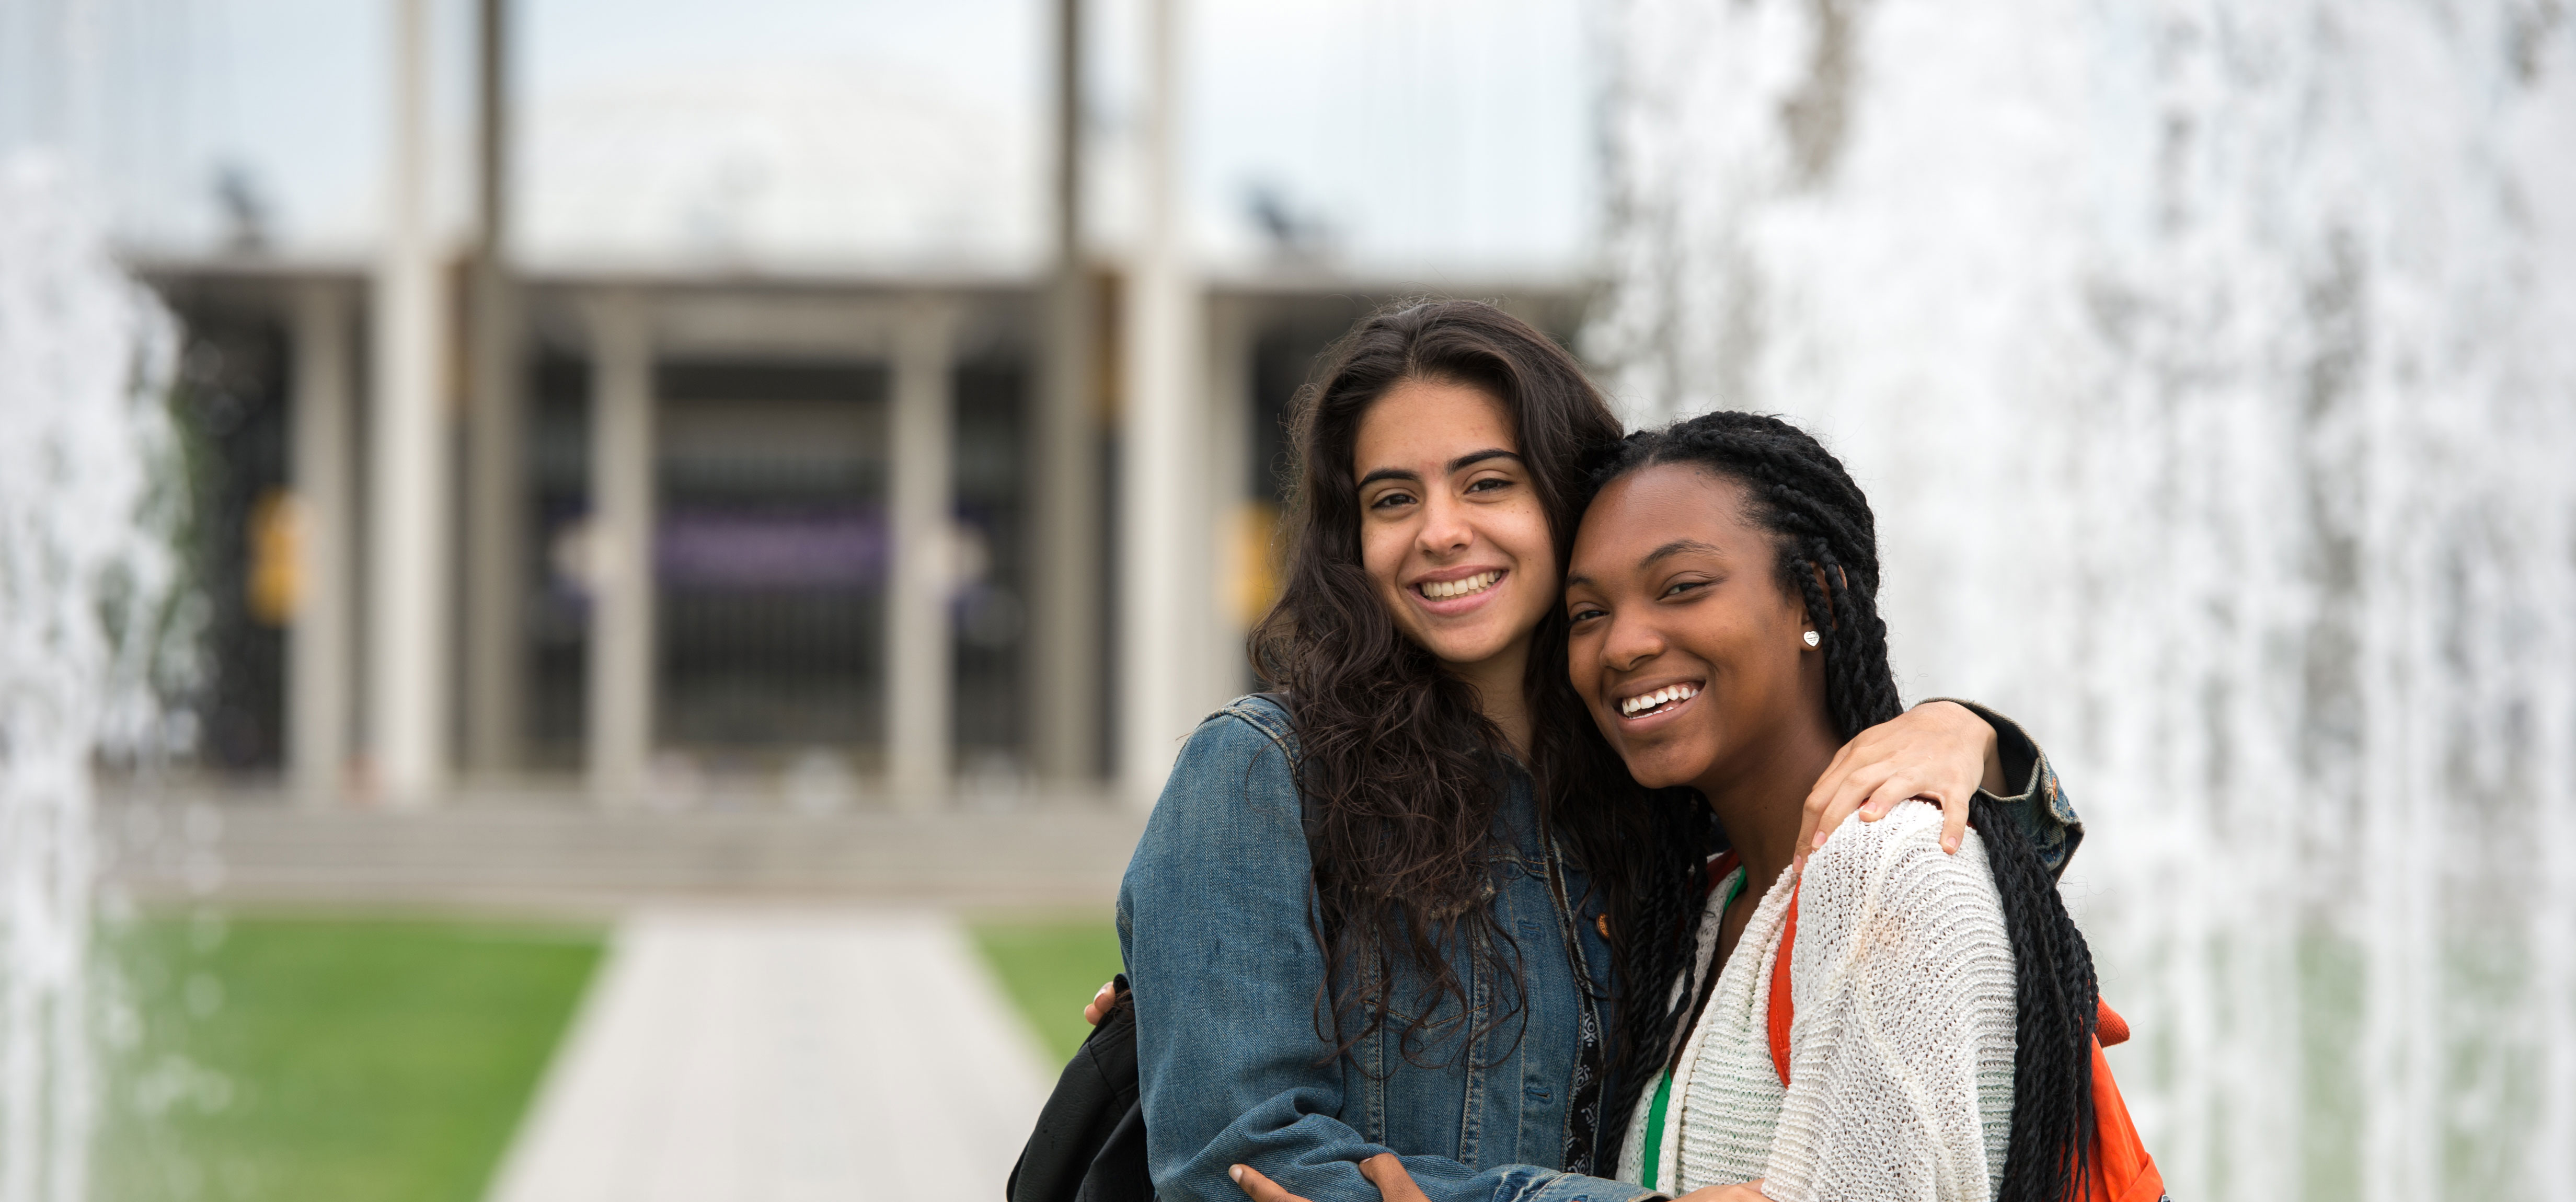 Two students with backpacks embrace as they smile and pose for a photo in front of fountains on the Uptown Campus.